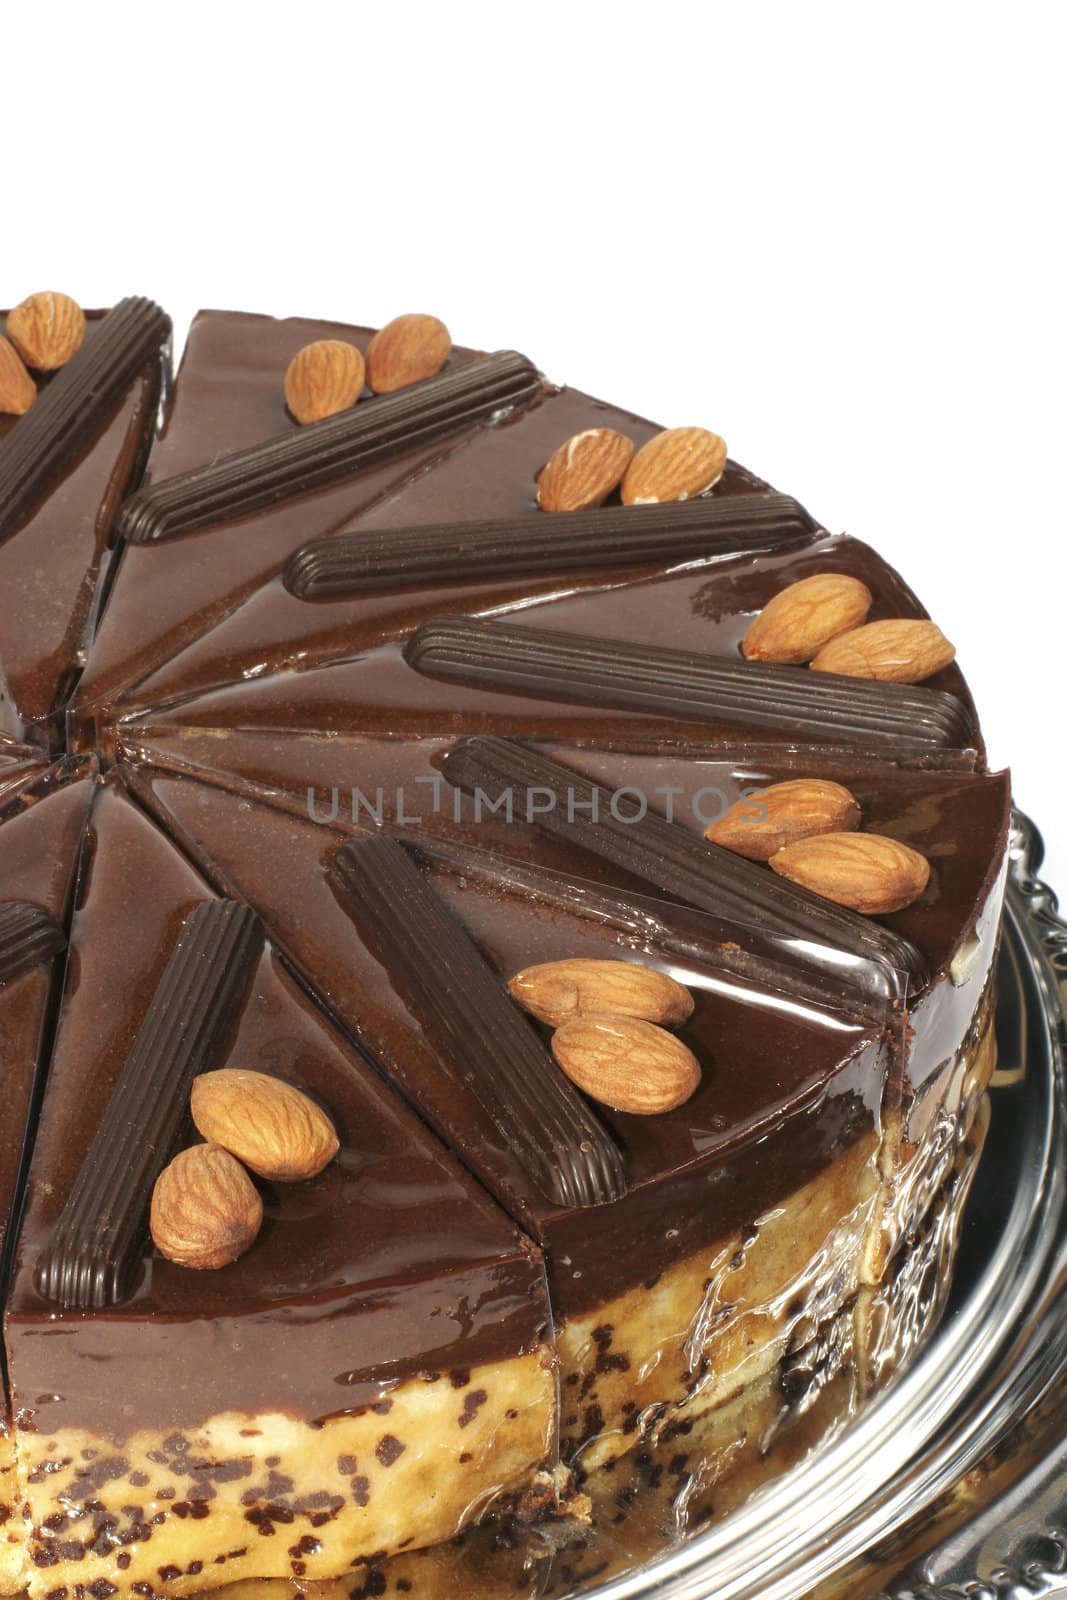 almond cake with chocolate stuffing and glaze